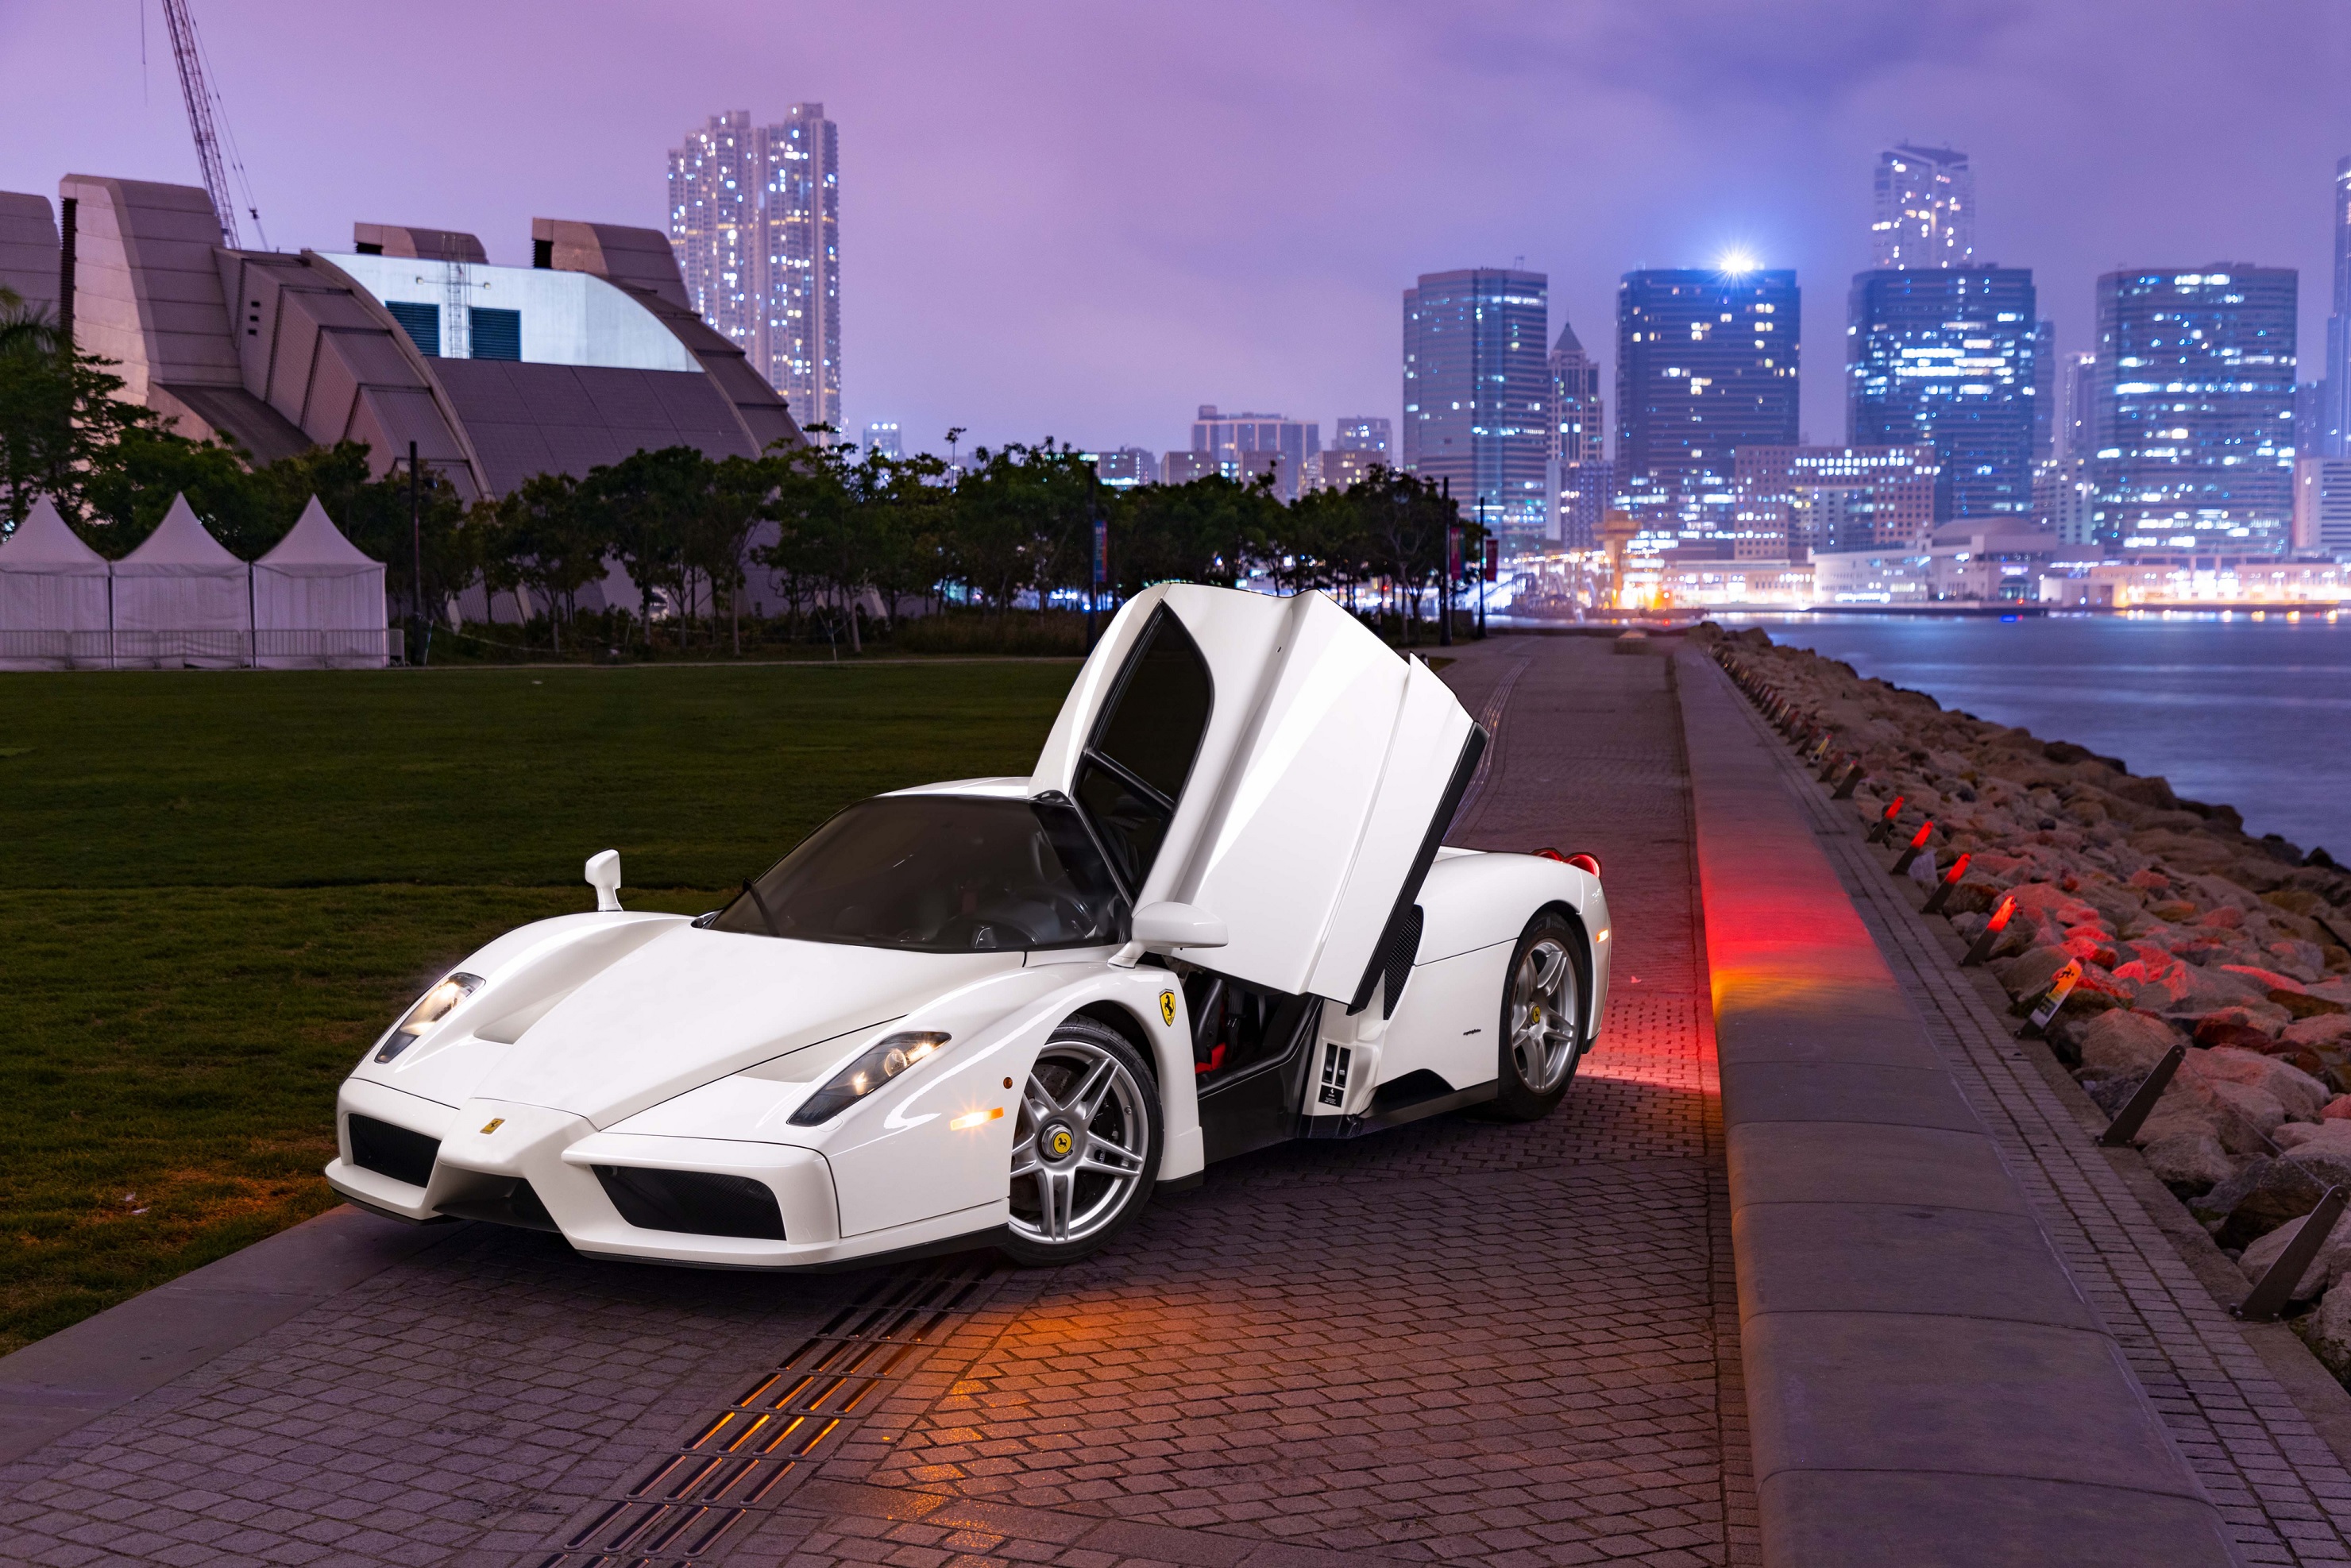 The front 3/4 view of the 1-of-1 Bianco Avus white 2003 Ferrari Enzo with its door open in front of a nighttime city skyline